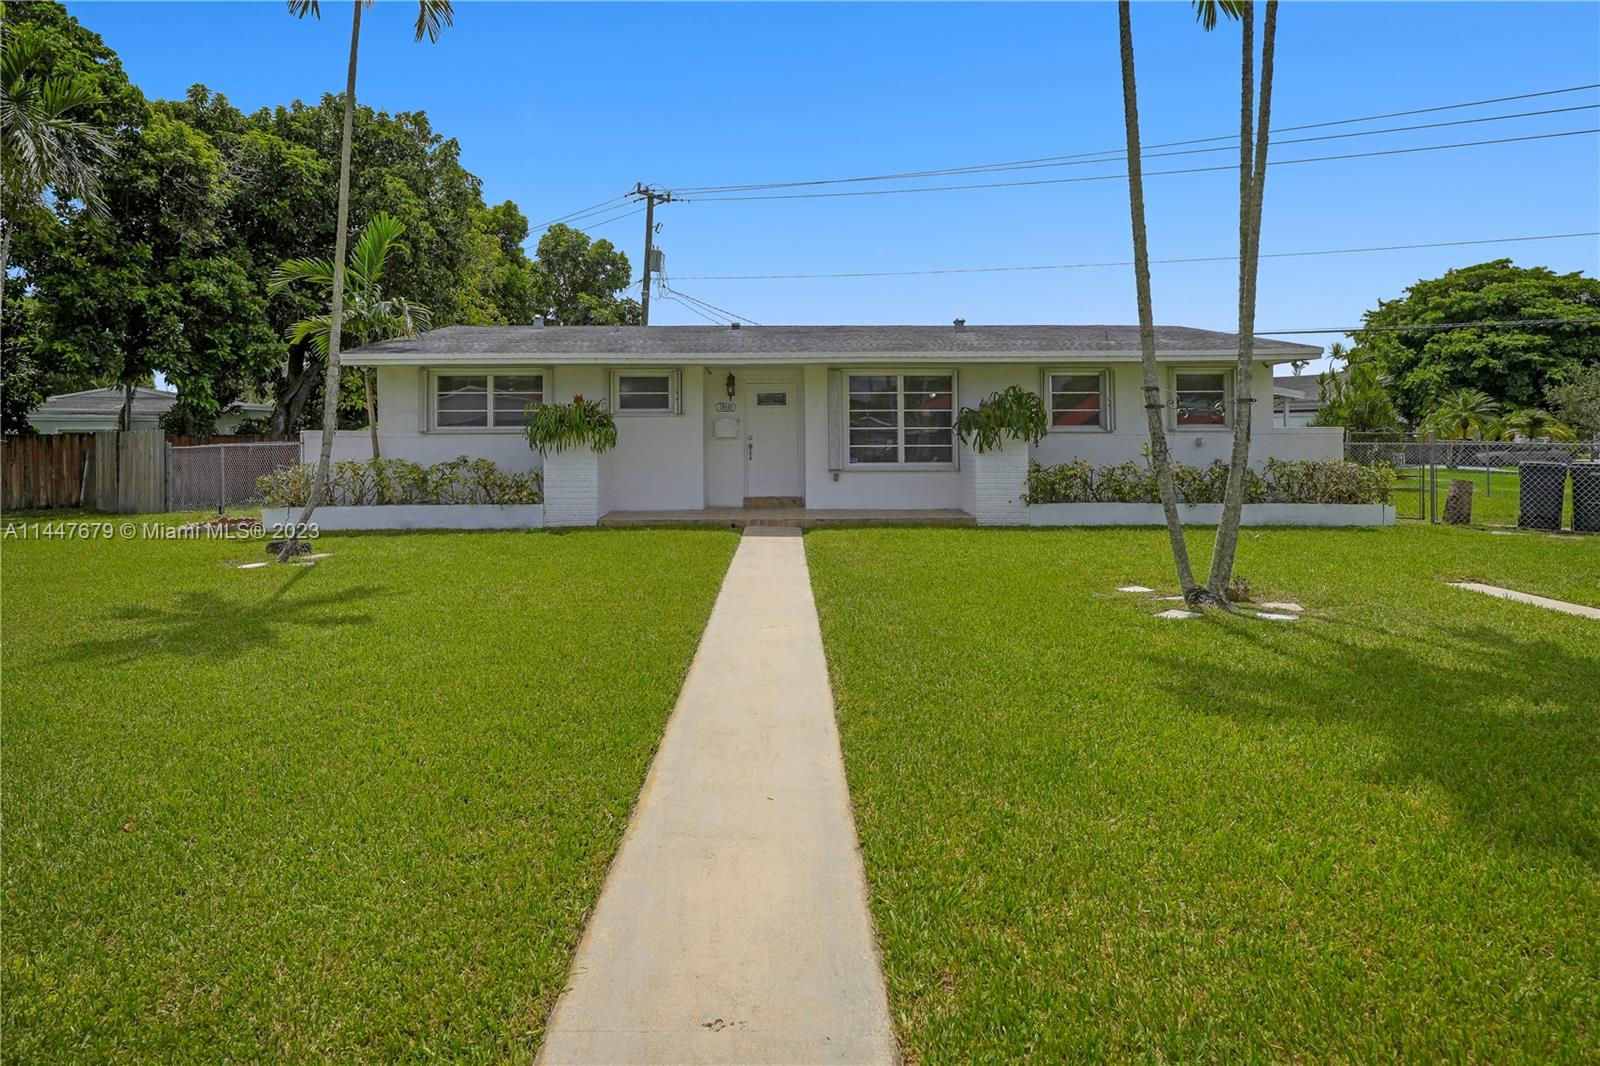 **Seller offers 10K credit for closing costs for a full price offer**Welcome to your new home nestled at the end of serene 186th Street in Cutler Bay; a highly desirable, family-oriented, Miami neighborhood with NO HOA. This wonderful location is very close to US1, shops, markets, entertainment & great schools. This enchanting 4 bedroom, 2 bathroom residence is move-in-ready; offering potential to remodel at your own pace & add your personal touch of Miami style. This property features a large kitchen area, 3 spacious bedrooms plus a larger main bedroom with private entrance which could serve as in-law quarters or for extra income. The huge 9,000 SqFt corner lot is perfect for a pool with extra room for your RV or boat. Seize this incredible opportunity now to own this home in Miami.